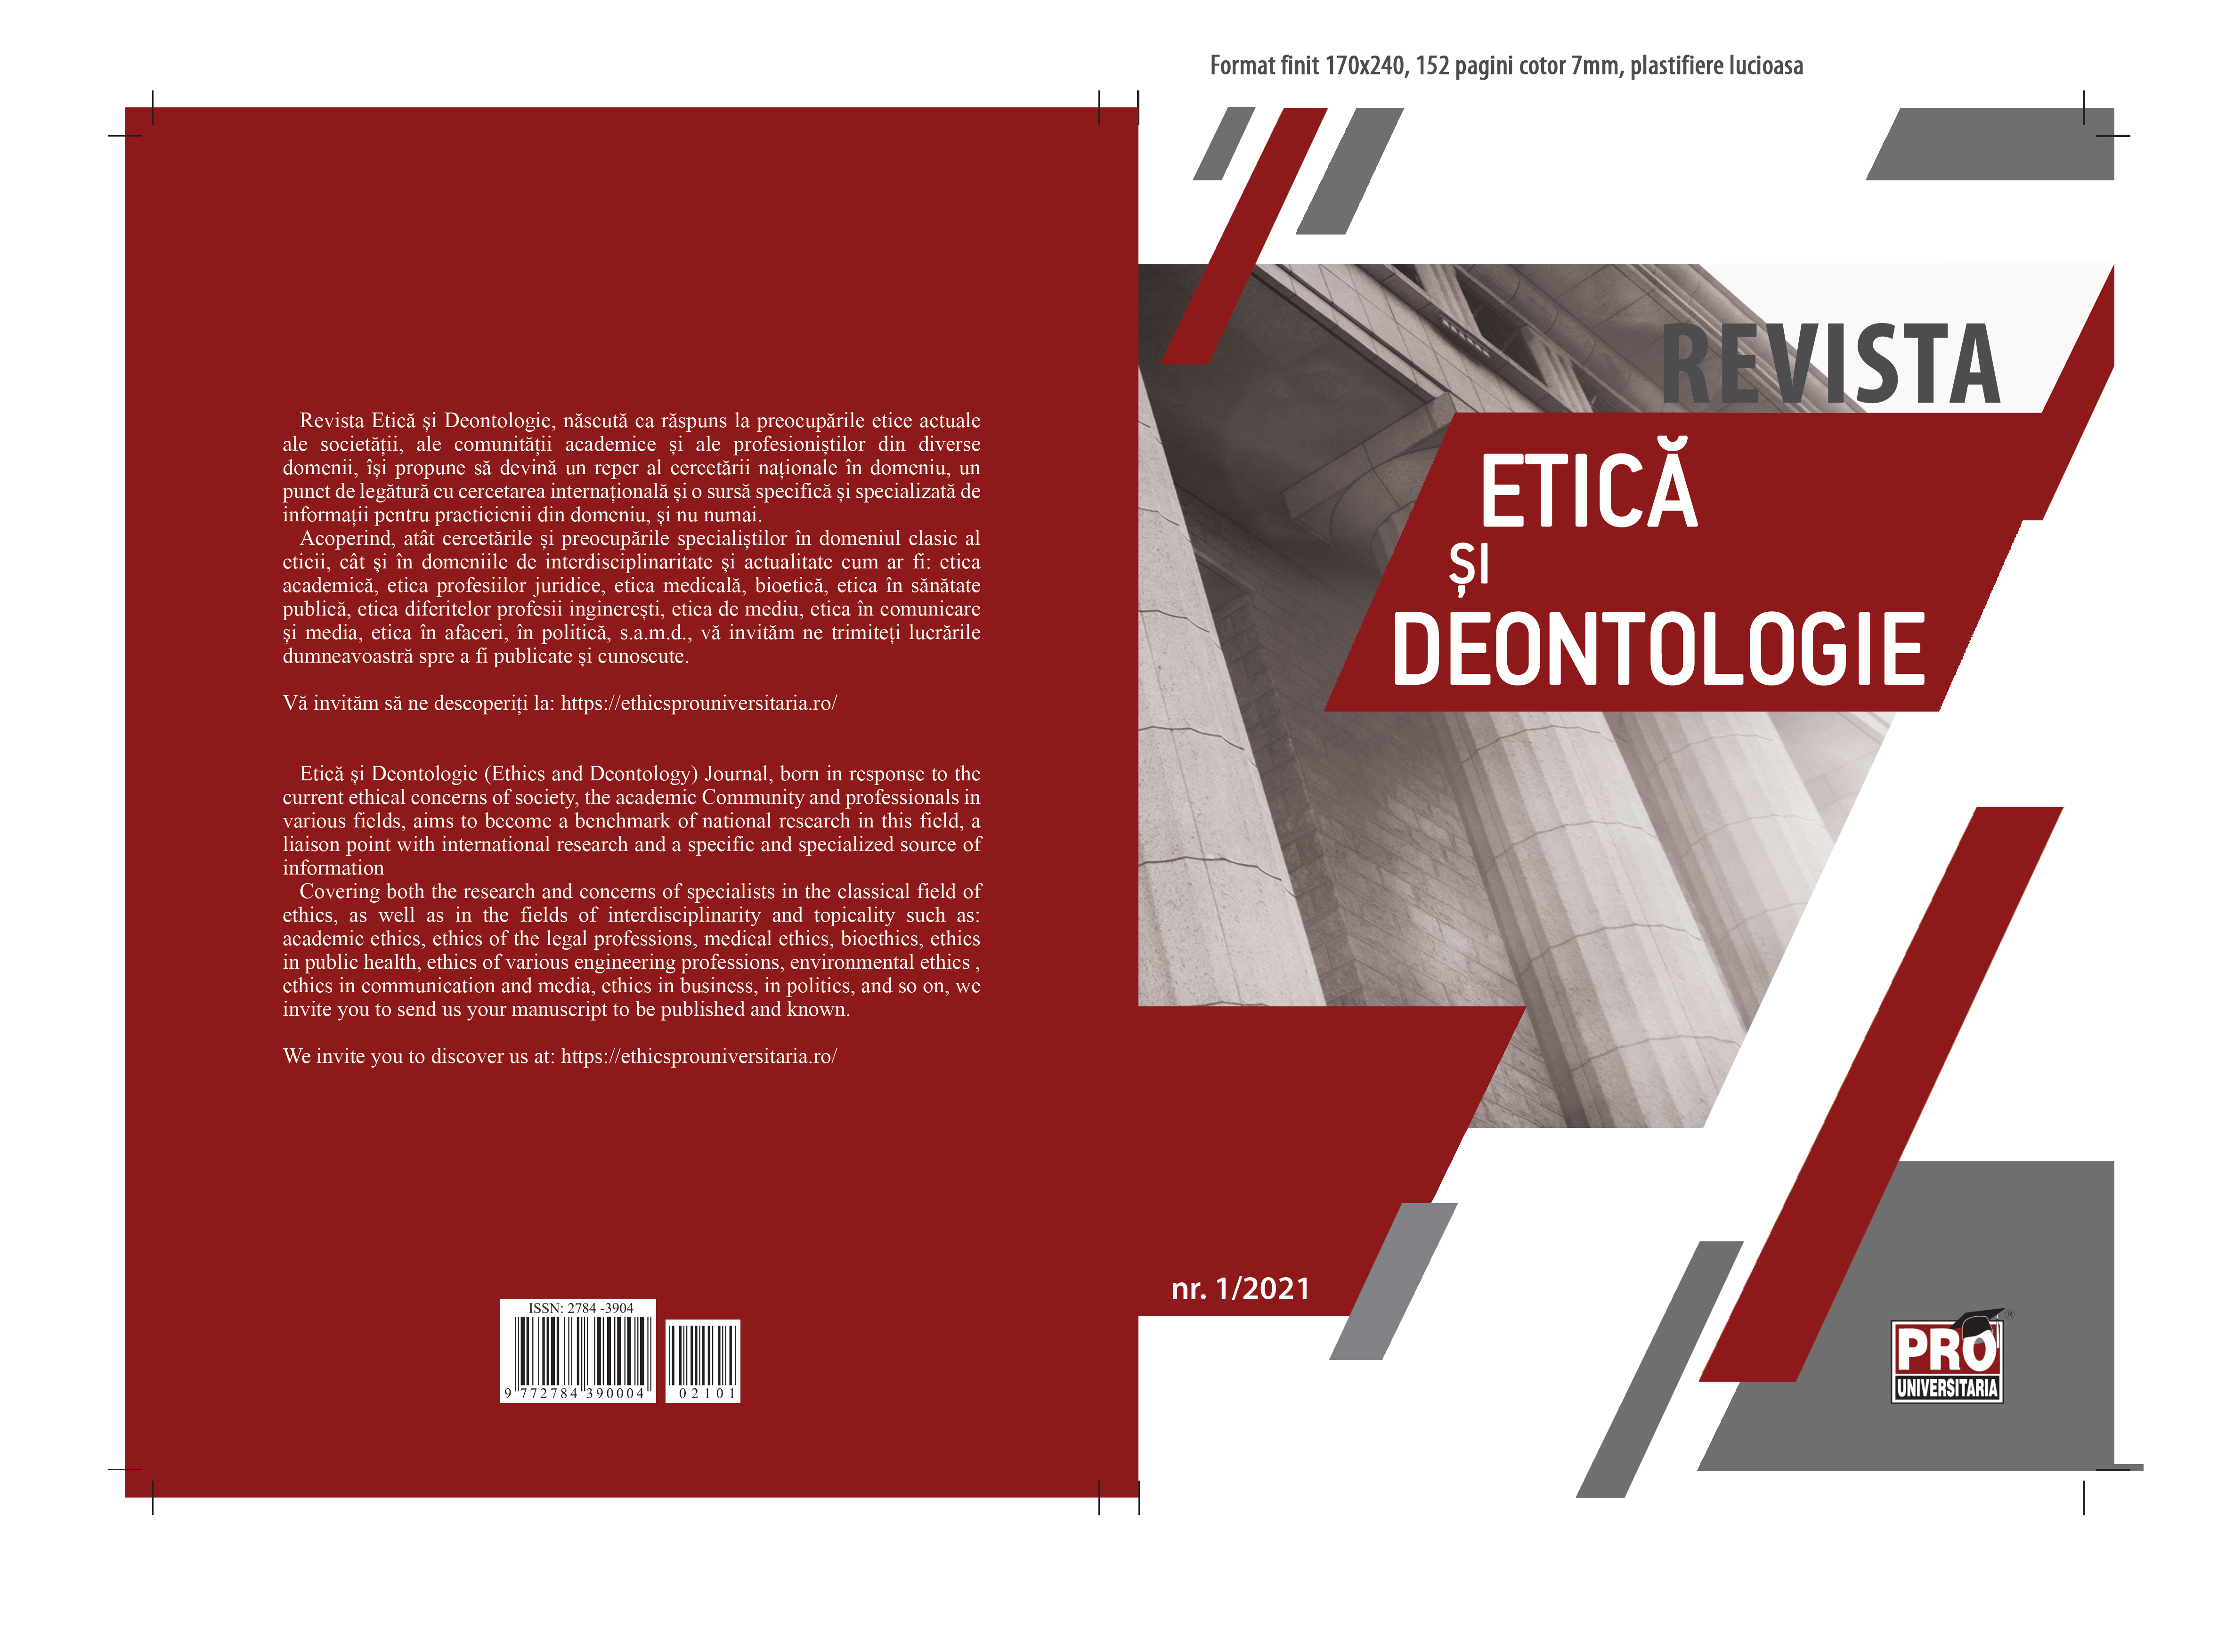 Dilemmas and Challenges in Supporting Courses of Ethics, Deontology and Academic Integrity Cover Image